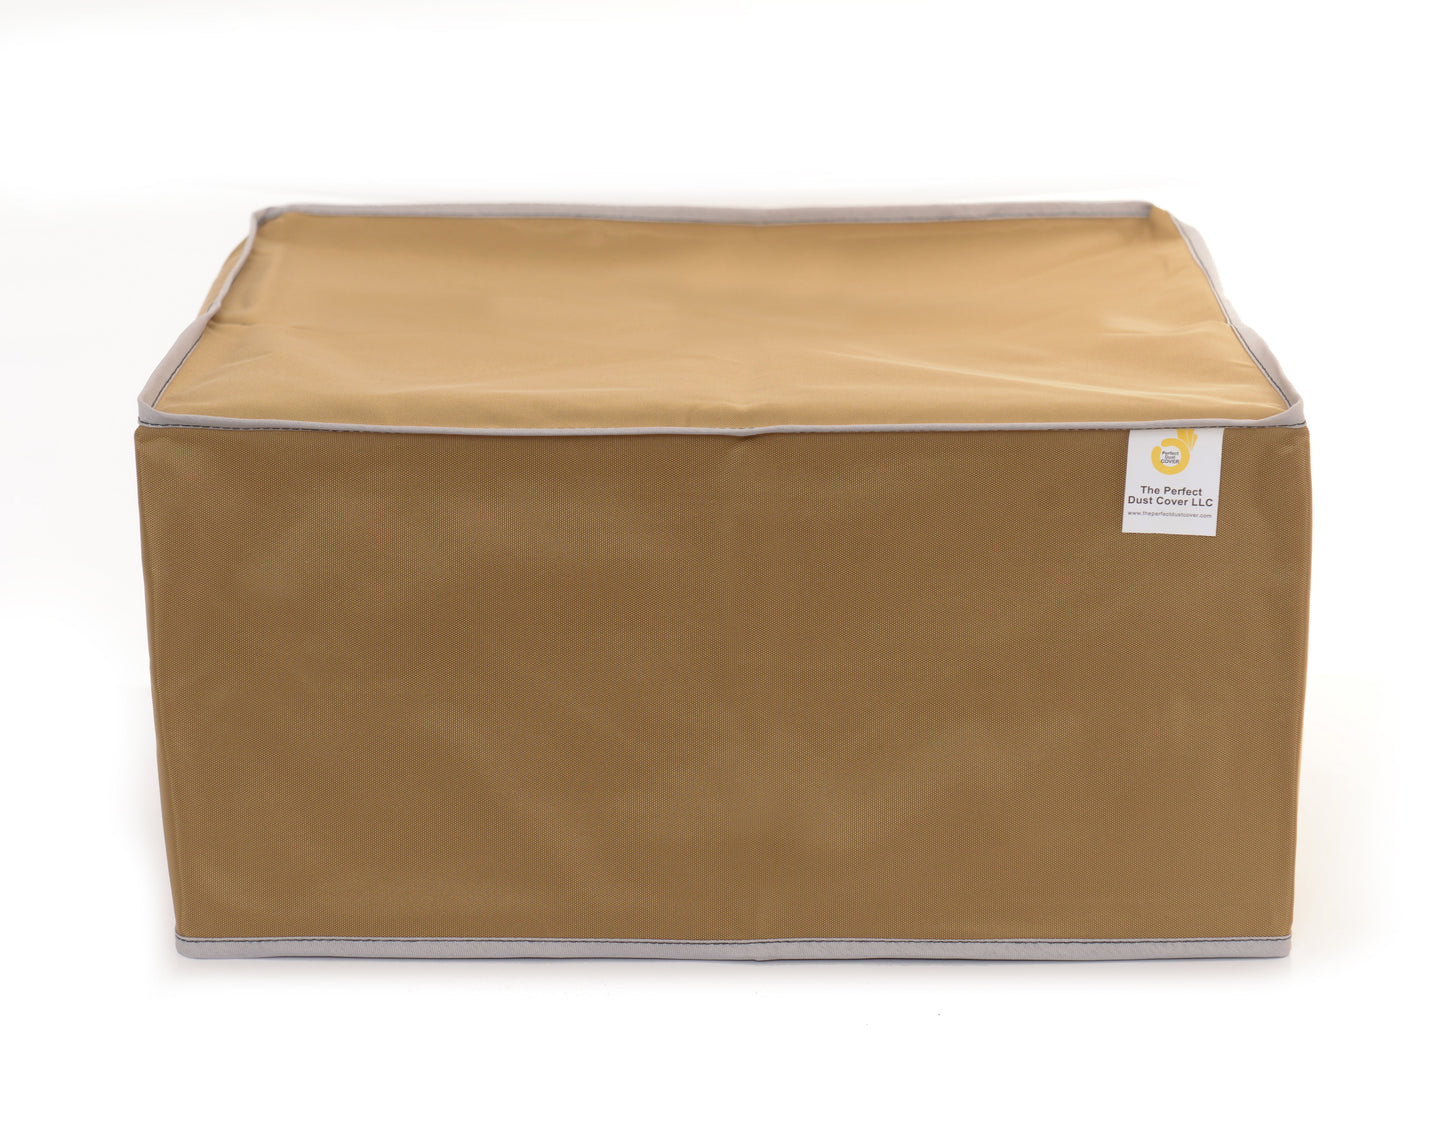 The Perfect Dust Cover, Tan Nylon Cover for HP Laserjet Pro MFP M426fdw Laser Printer, Anti Static and Waterproof Cover Dimensions 16.5''W x 15.3''D x 12.7''H by The Perfect Dust Cover LLC